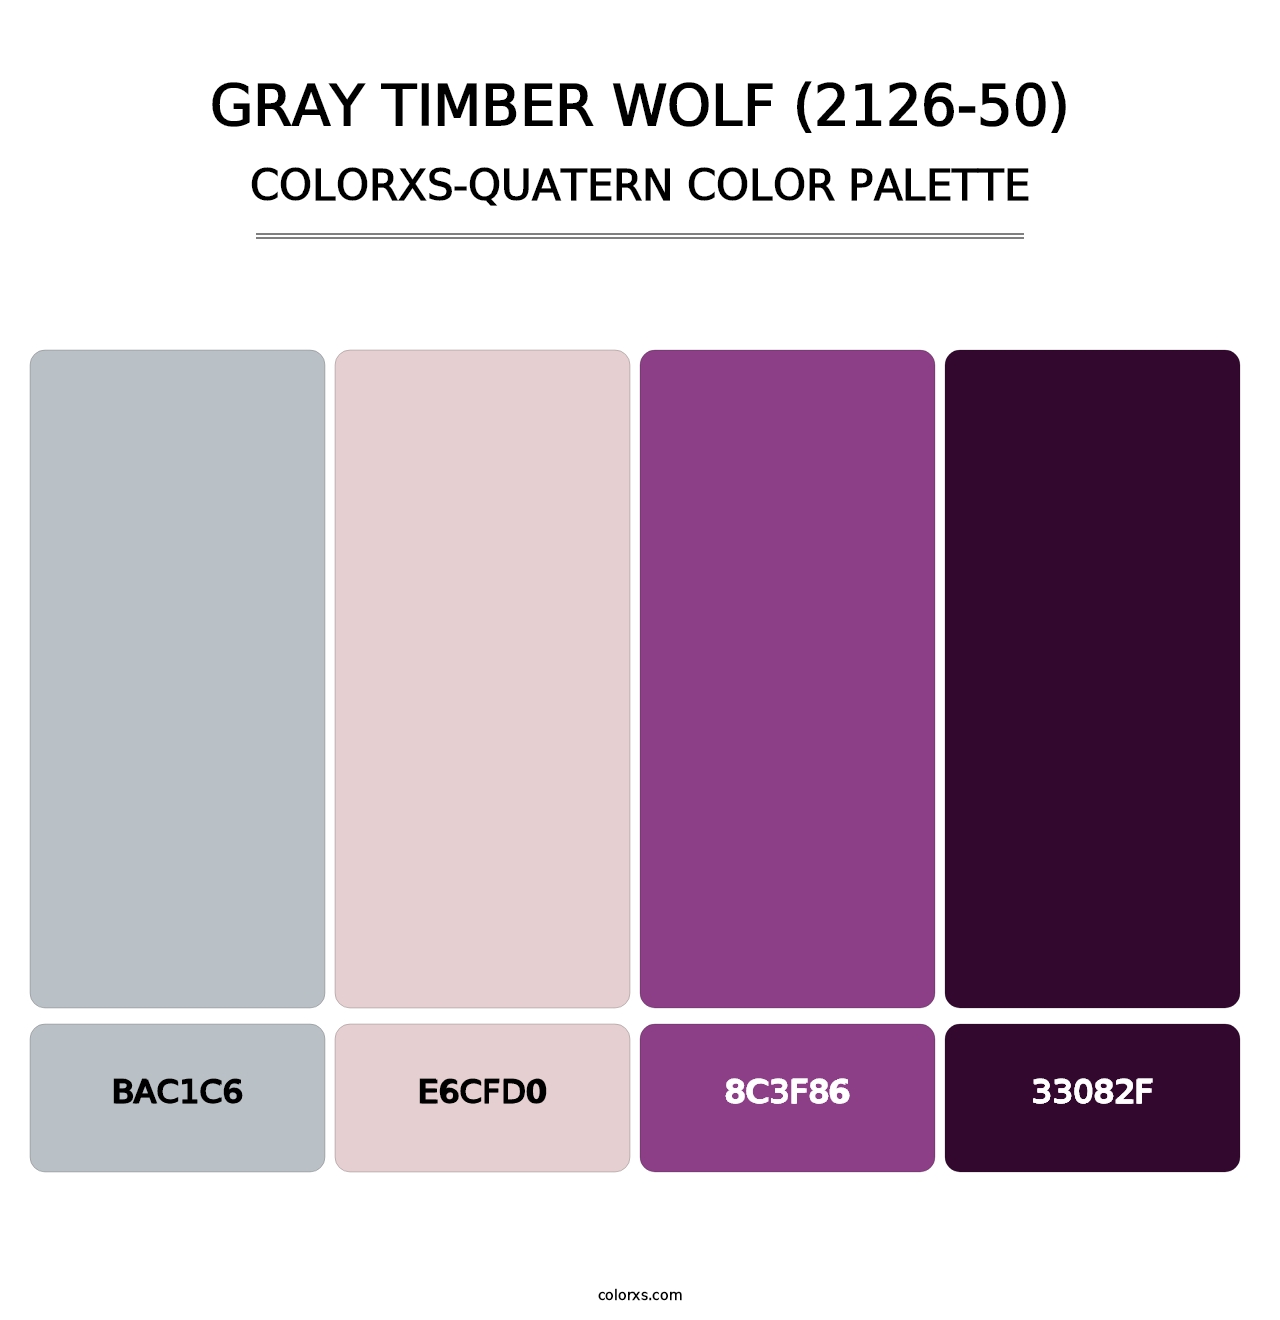 Gray Timber Wolf (2126-50) - Colorxs Quatern Palette